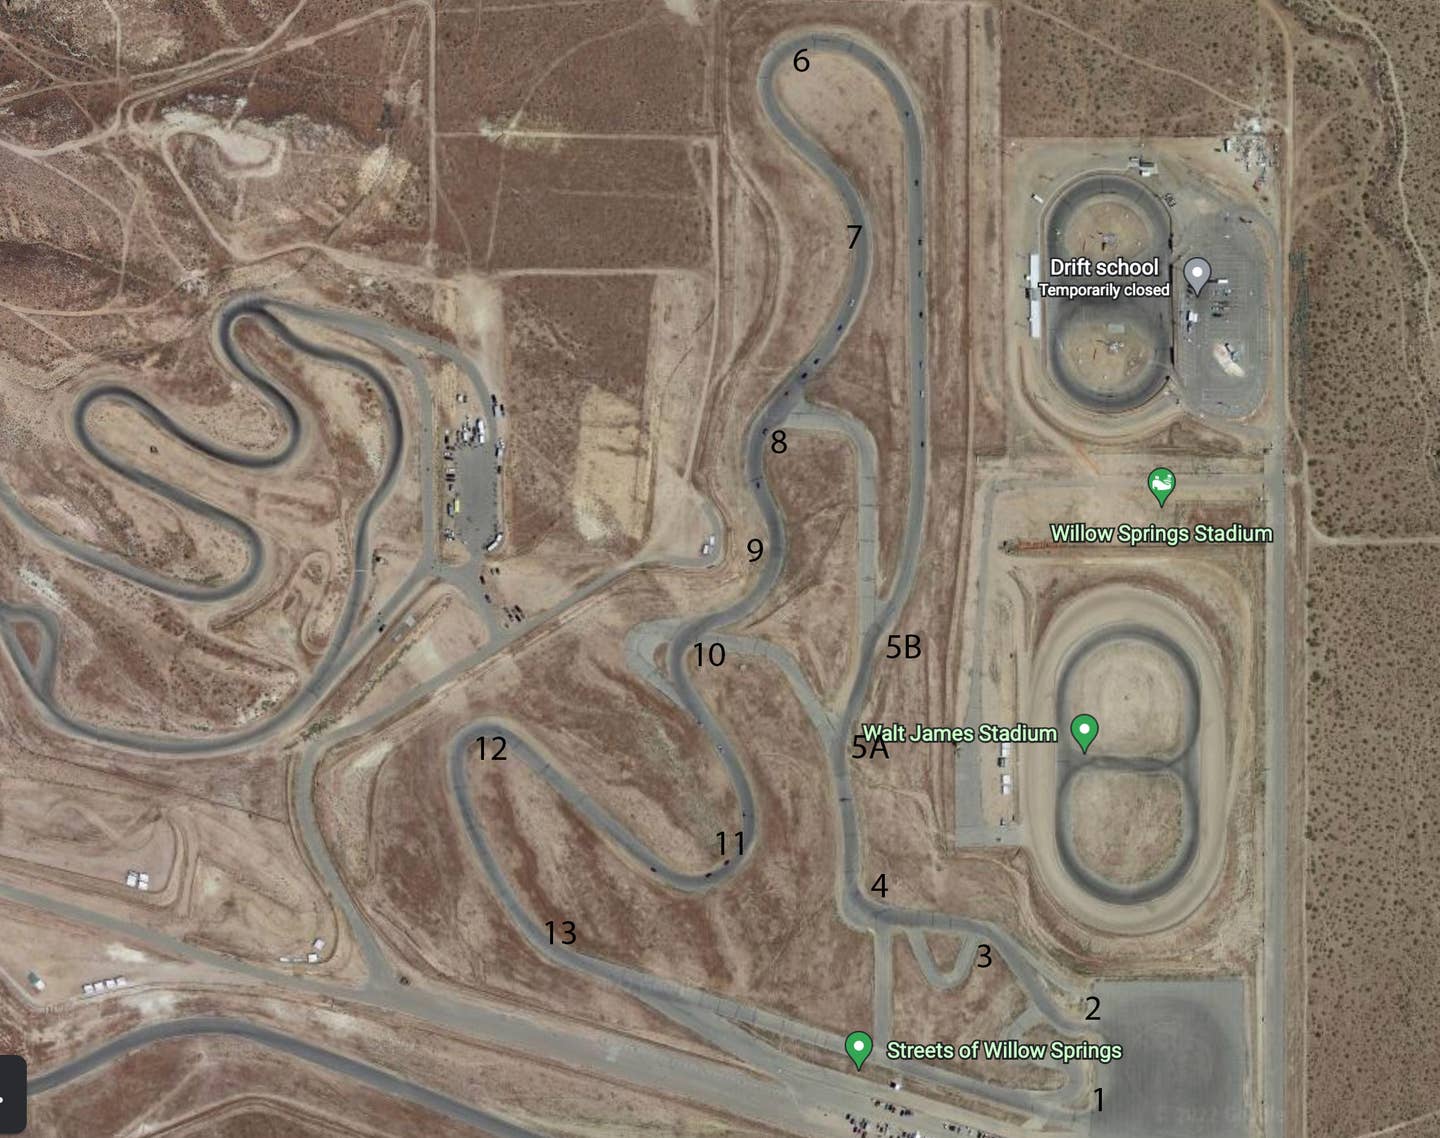 Here's an annotated Google Earth view of the track. You can also a track illustration at <a href="https://www.raceoptimal.com/maps/WillowSpringsStreetsofWillowCCW" target="_blank" rel="noreferrer noopener">RaceOptimal.com</a> which you might find a little easier to follow. <em>Google</em>